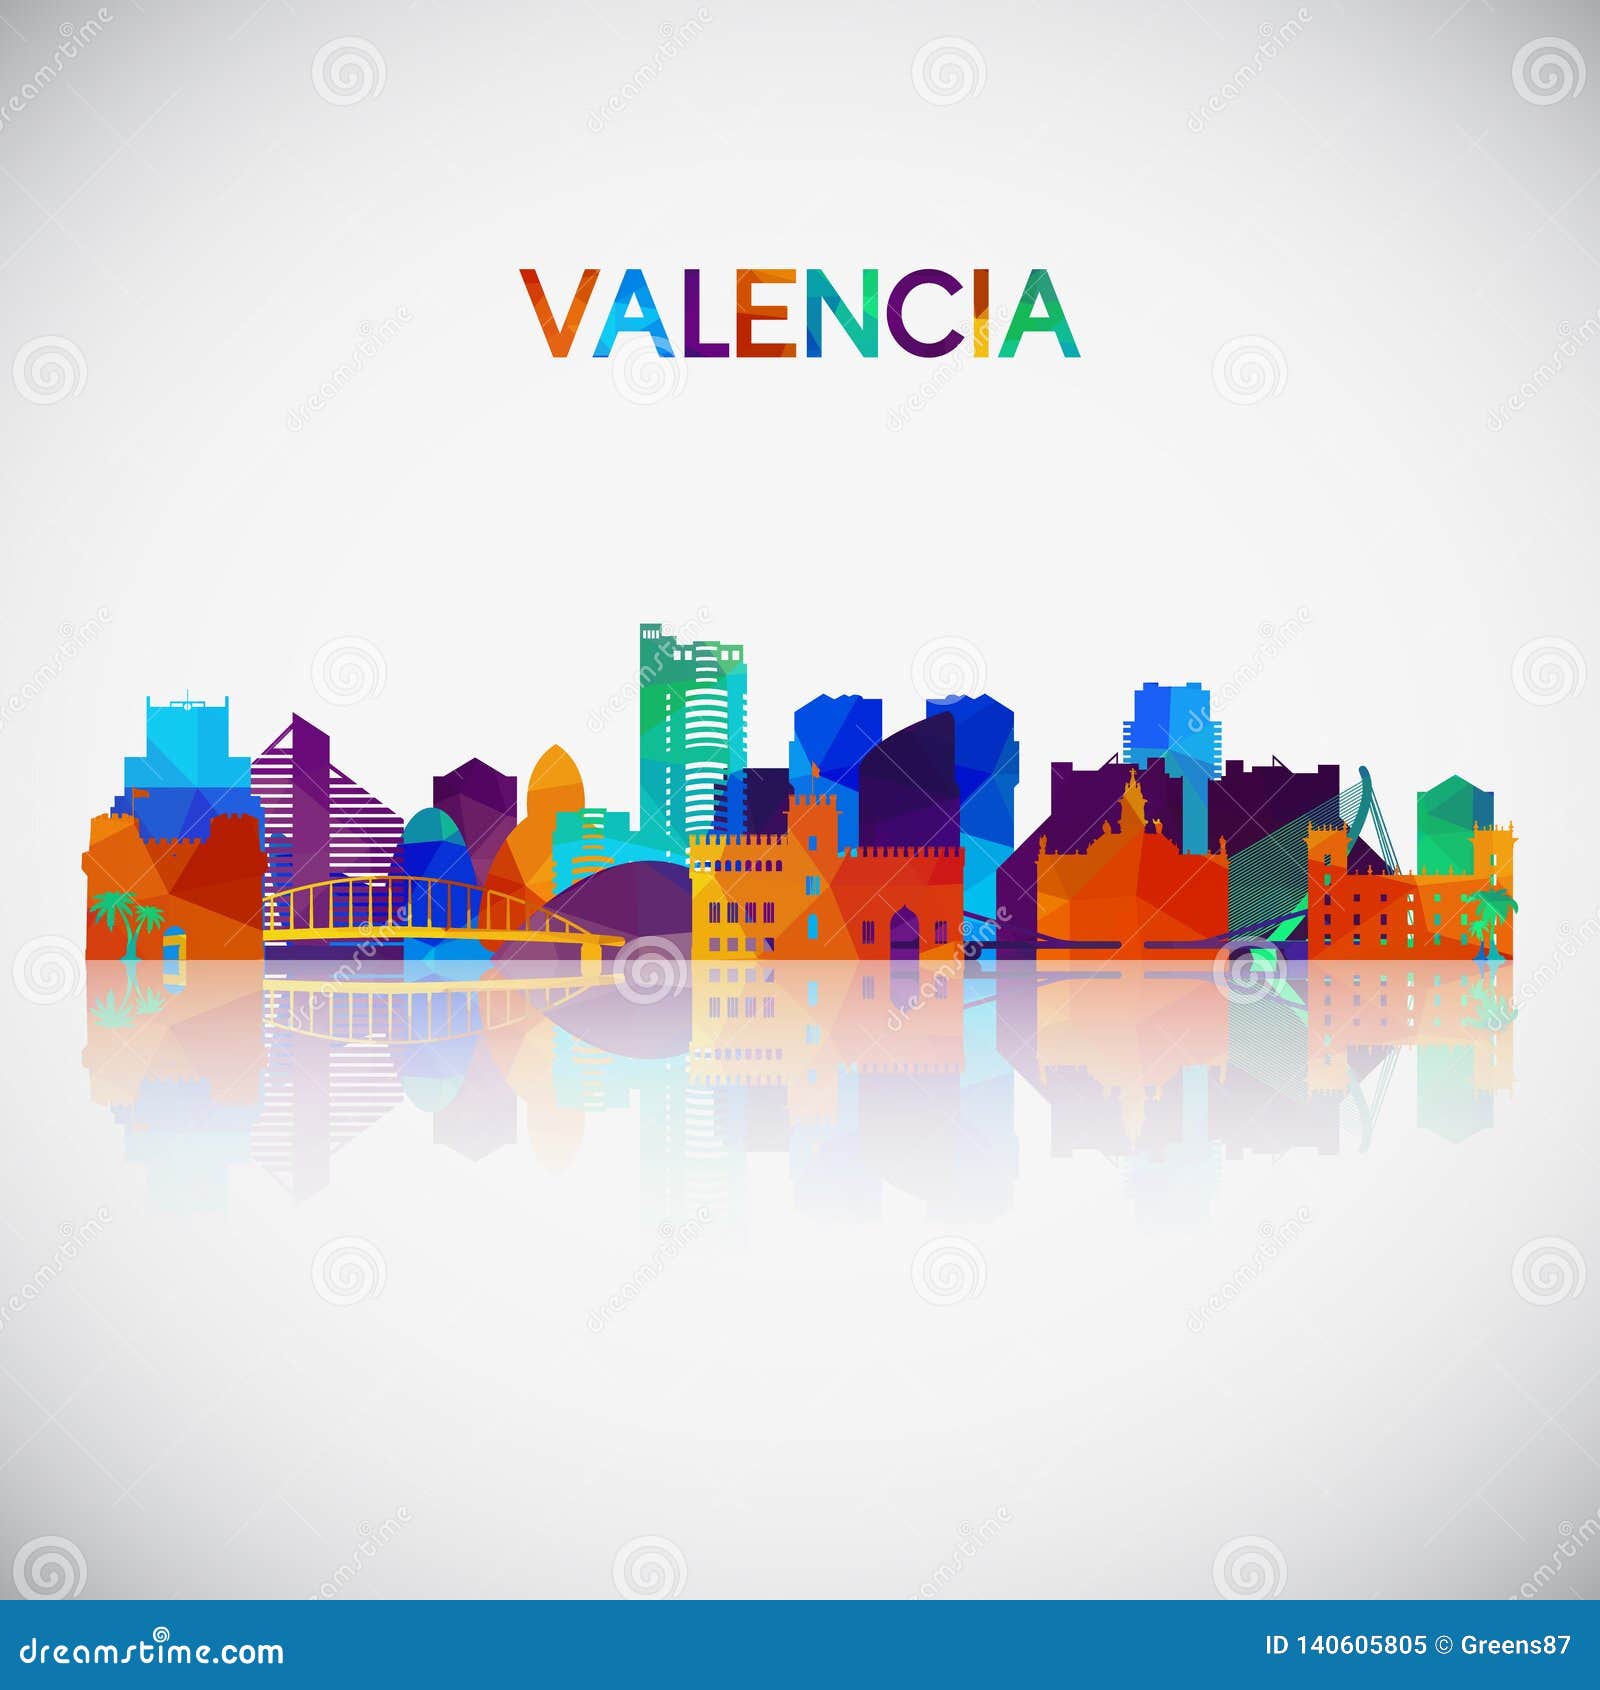 valencia skyline silhouette in colorful geometric style.